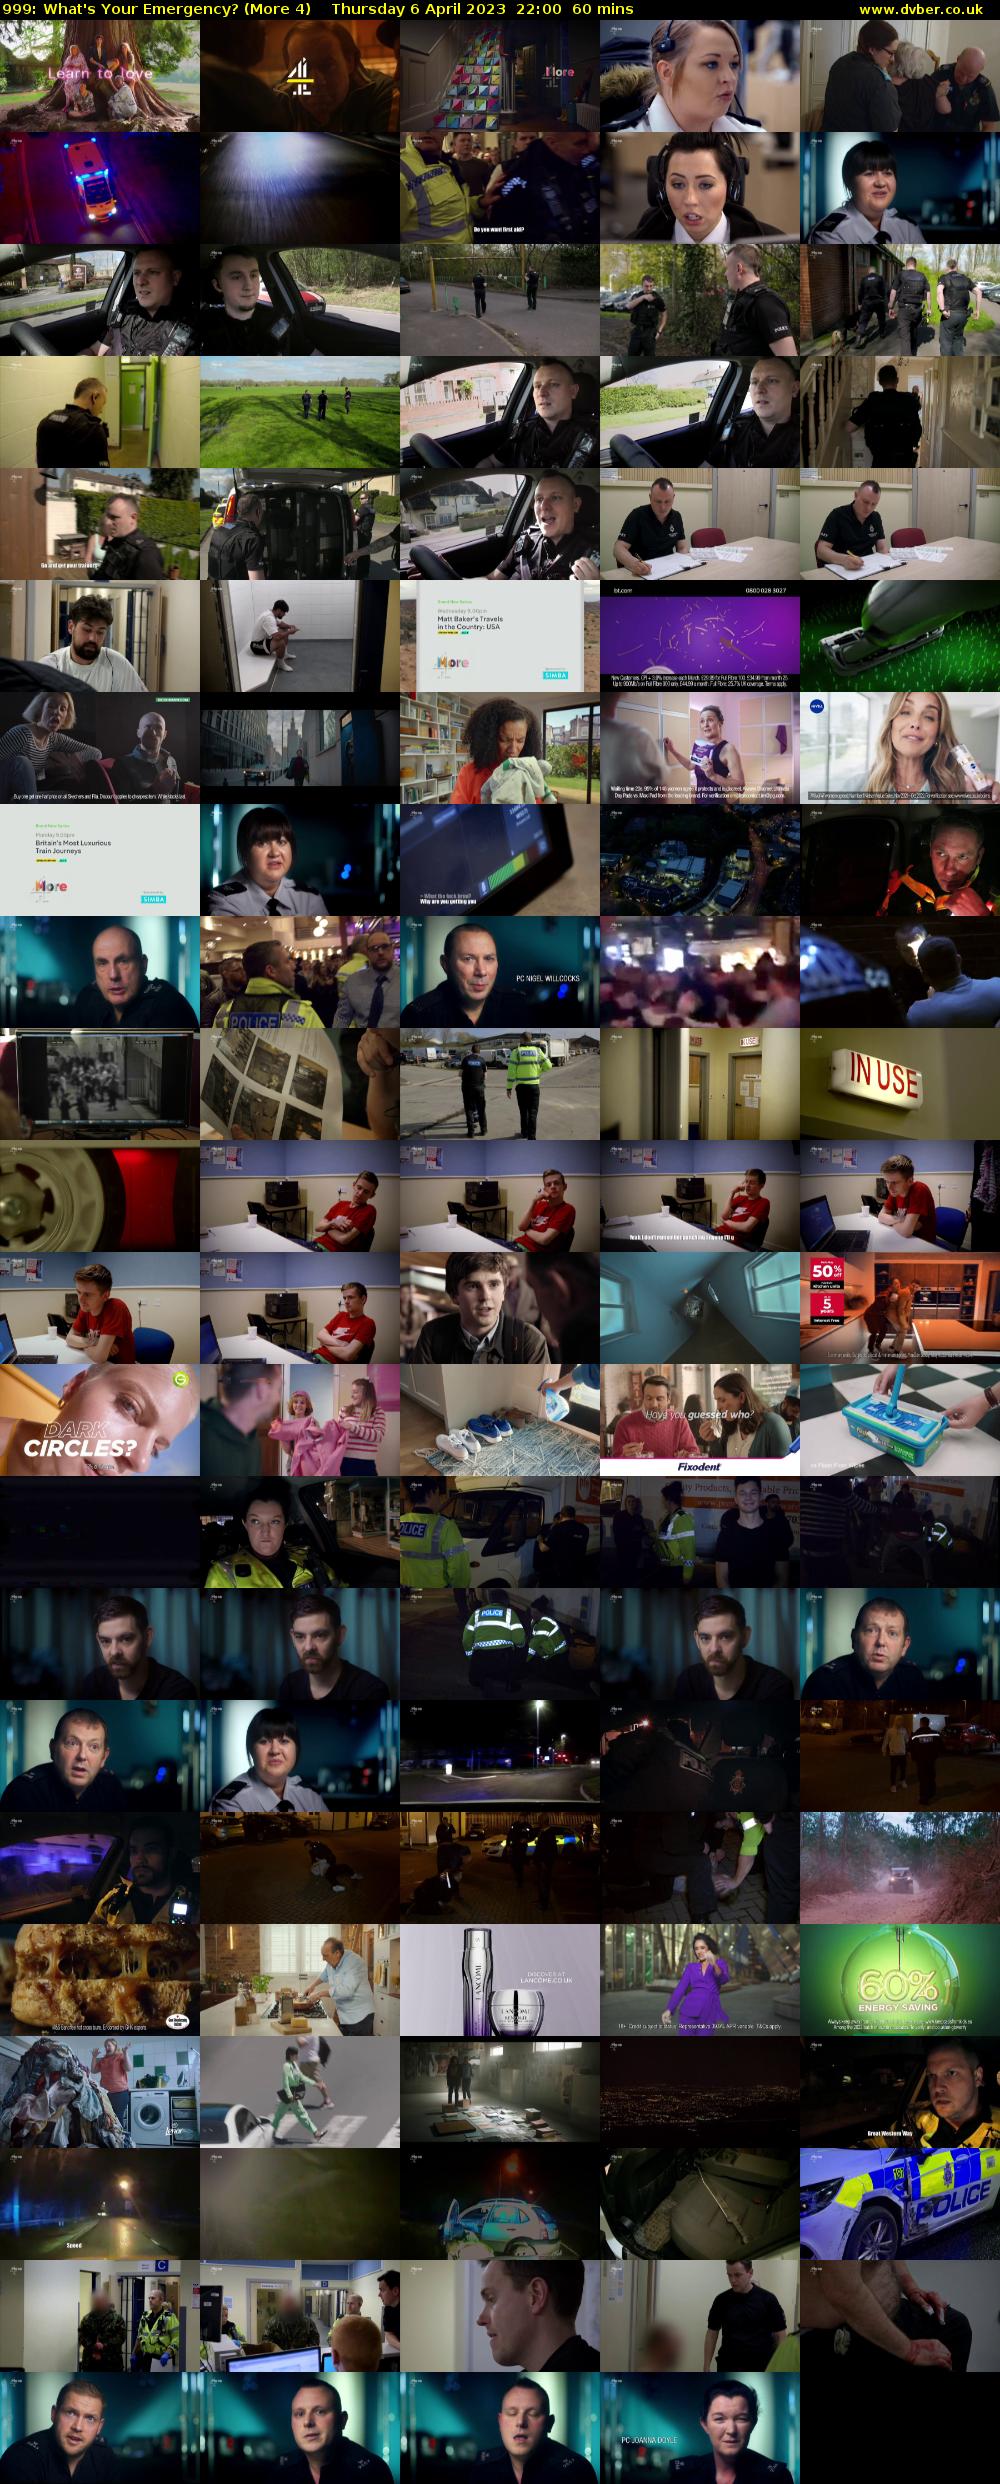 999: What's Your Emergency? (More 4) Thursday 6 April 2023 22:00 - 23:00